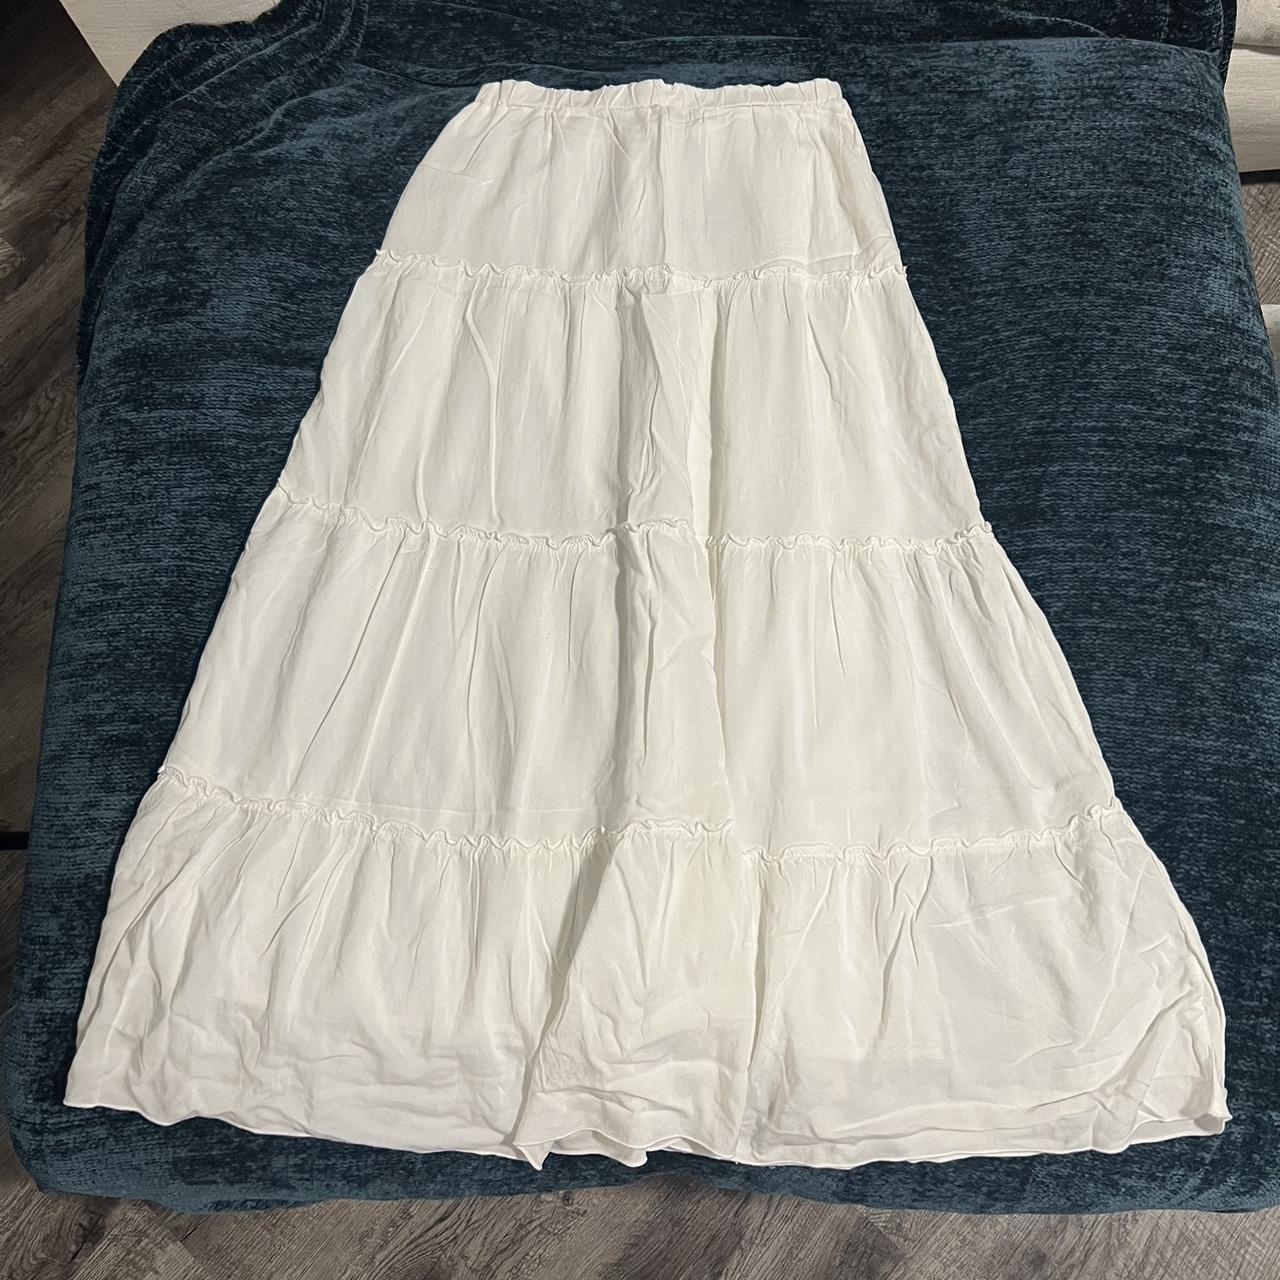 Brandy Melville Tiered Maxi Skirt. Brand new with... - Depop